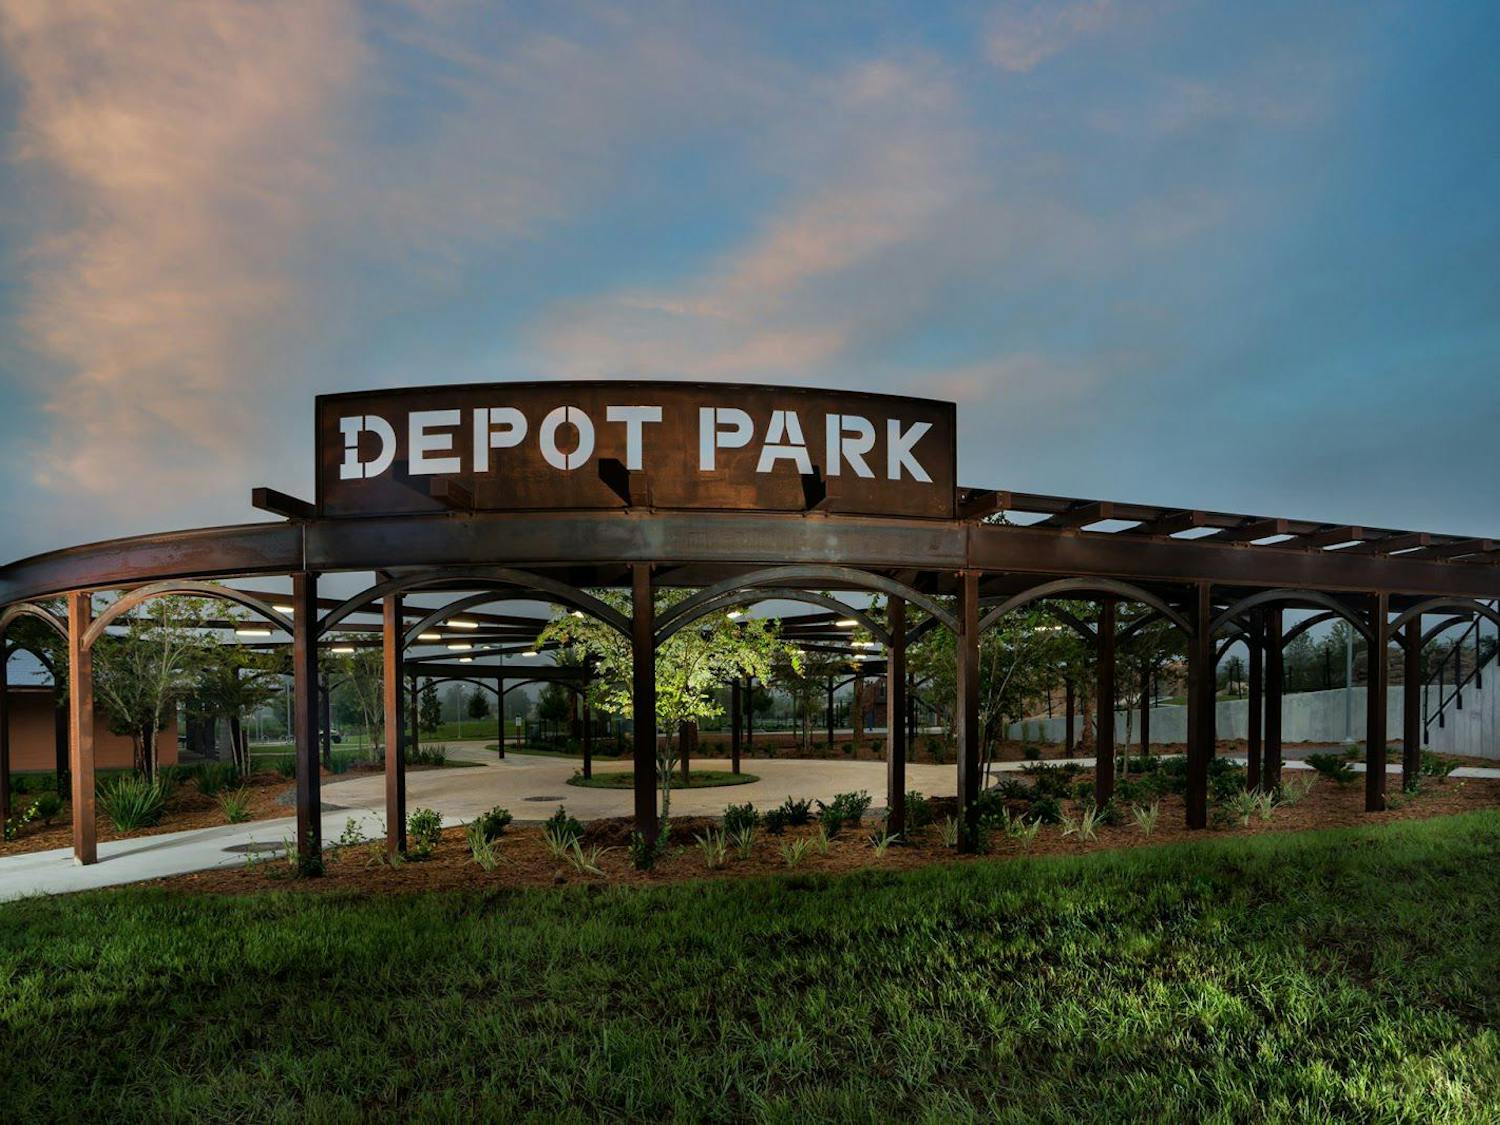 Depot Park is home to the interactive community event, Make Music Day.